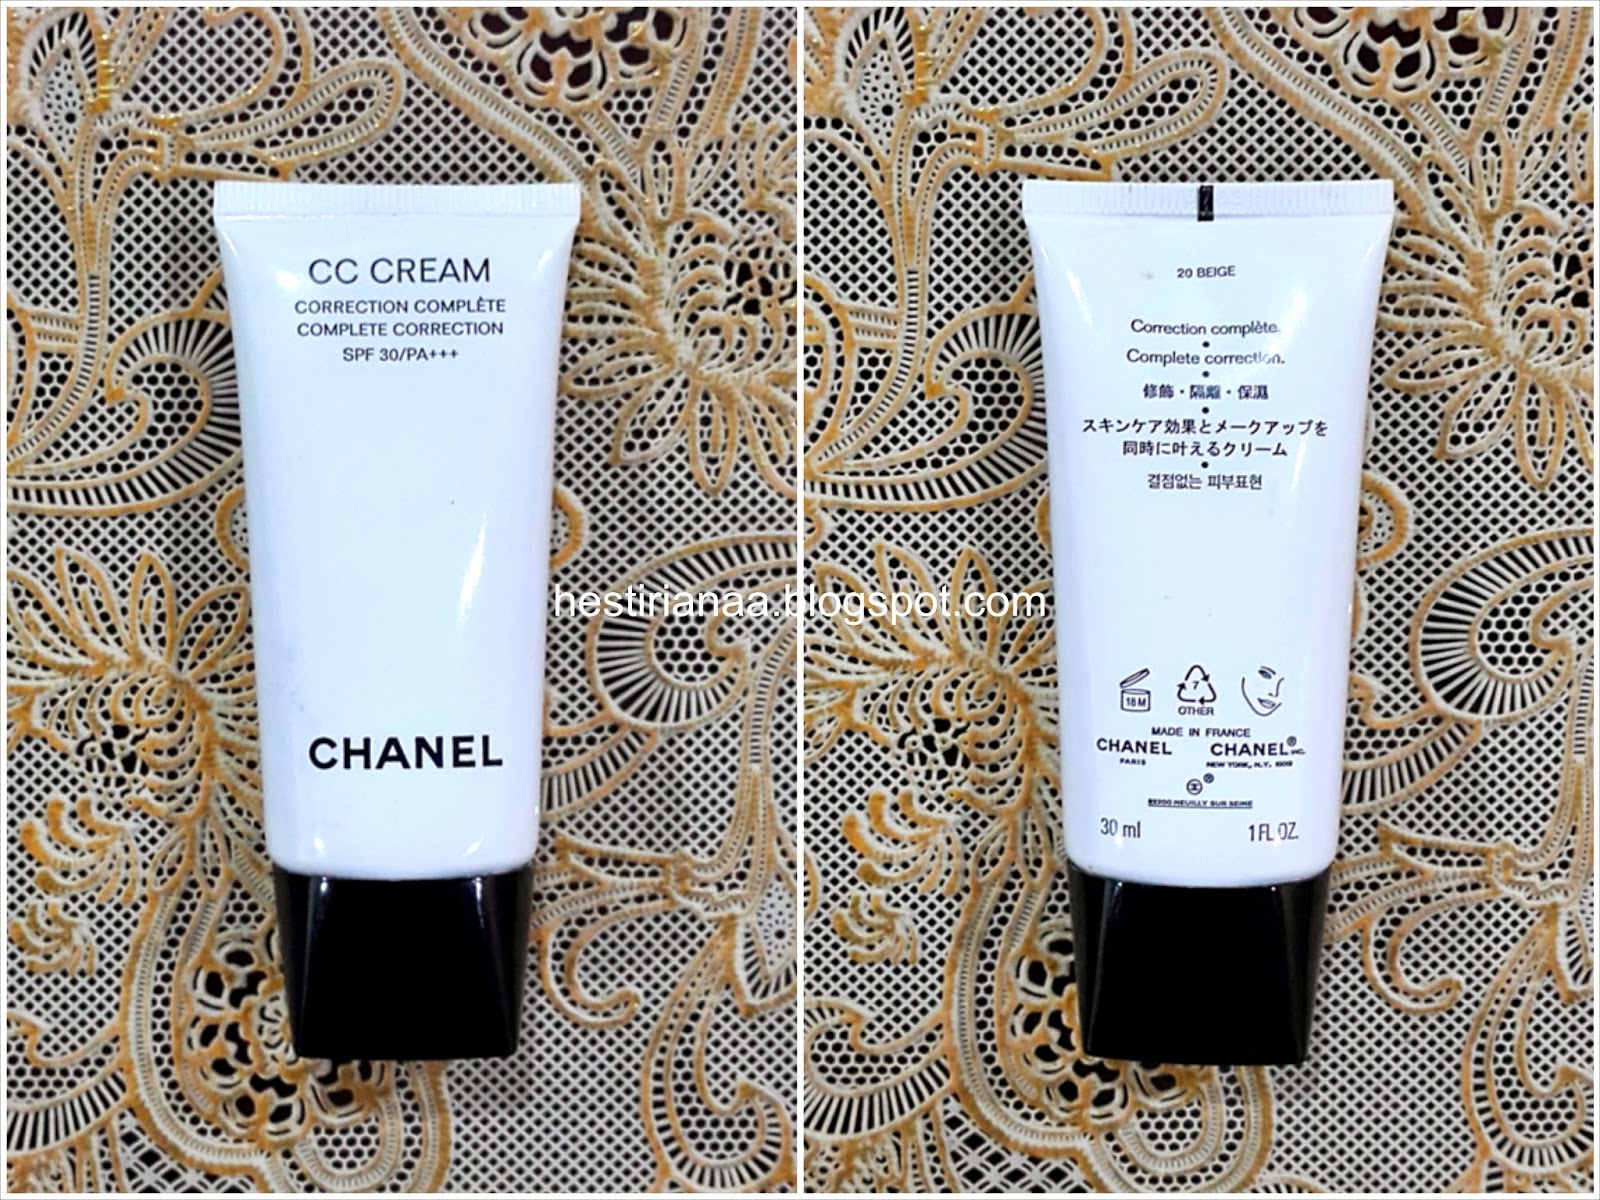 Chanel CC Cream Review: Is it Worthy? [Full Report]